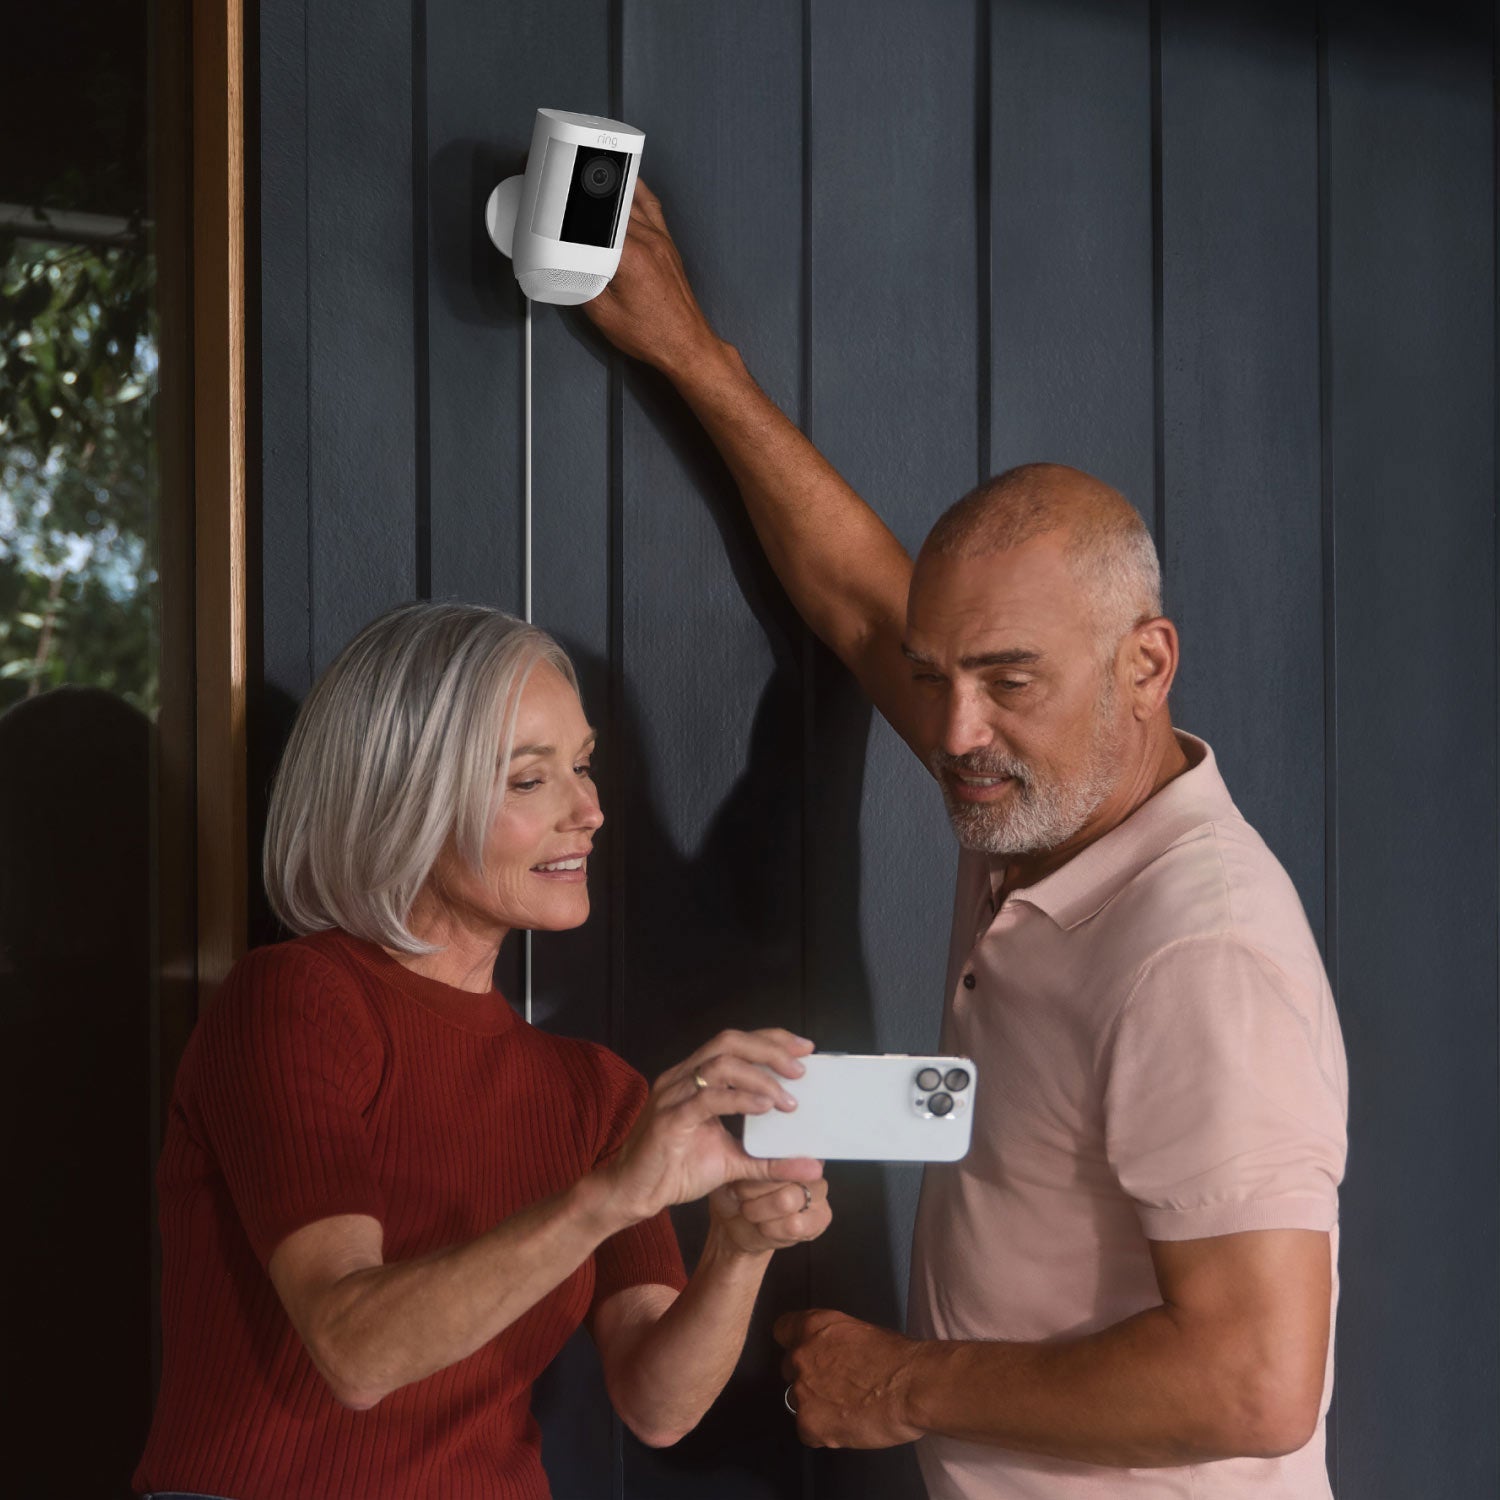 2-Pack Spotlight Cam Pro (Plug-In) - Woman and man looking at smartphone while installing Spotlight Cam Pro Plug-In model on exterior wall of home.